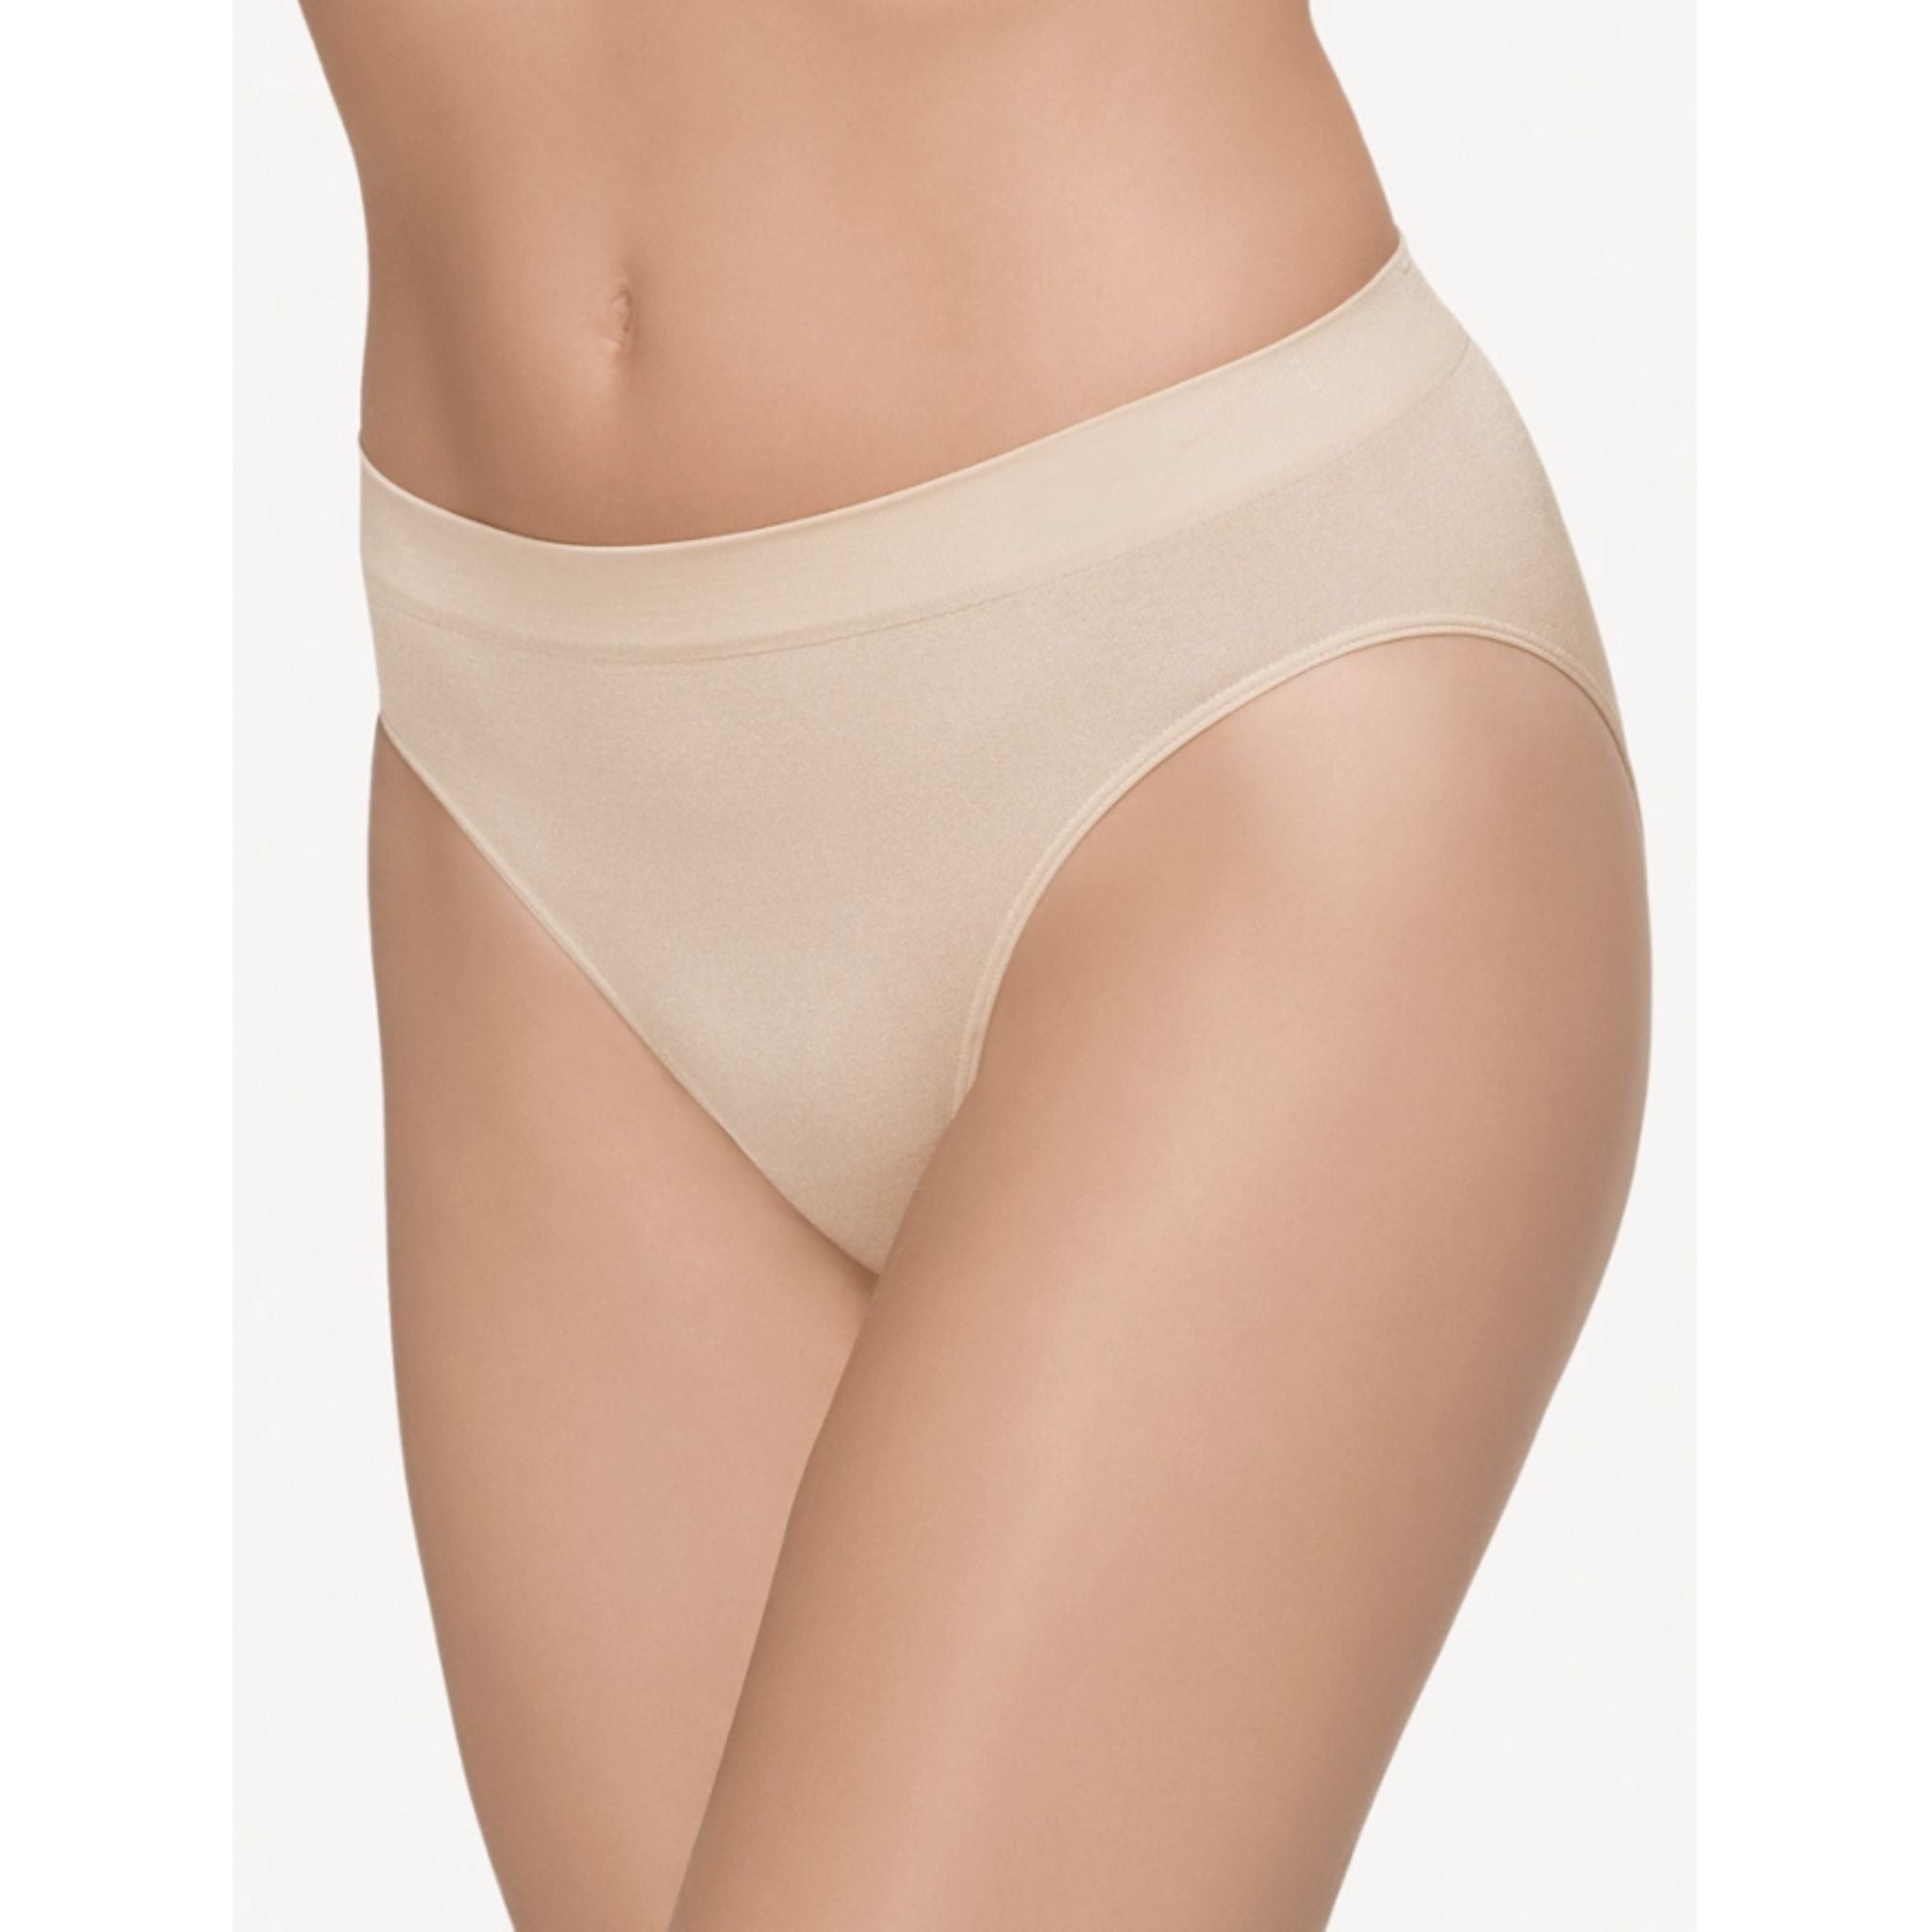 Hi-cut seamless brief  Smooth nylon/Lycra® supportive fabric  Totally seamless body  Ruching knitted in derrière  Clothes glide easily over panty for a sleek look  Hi-cut leg